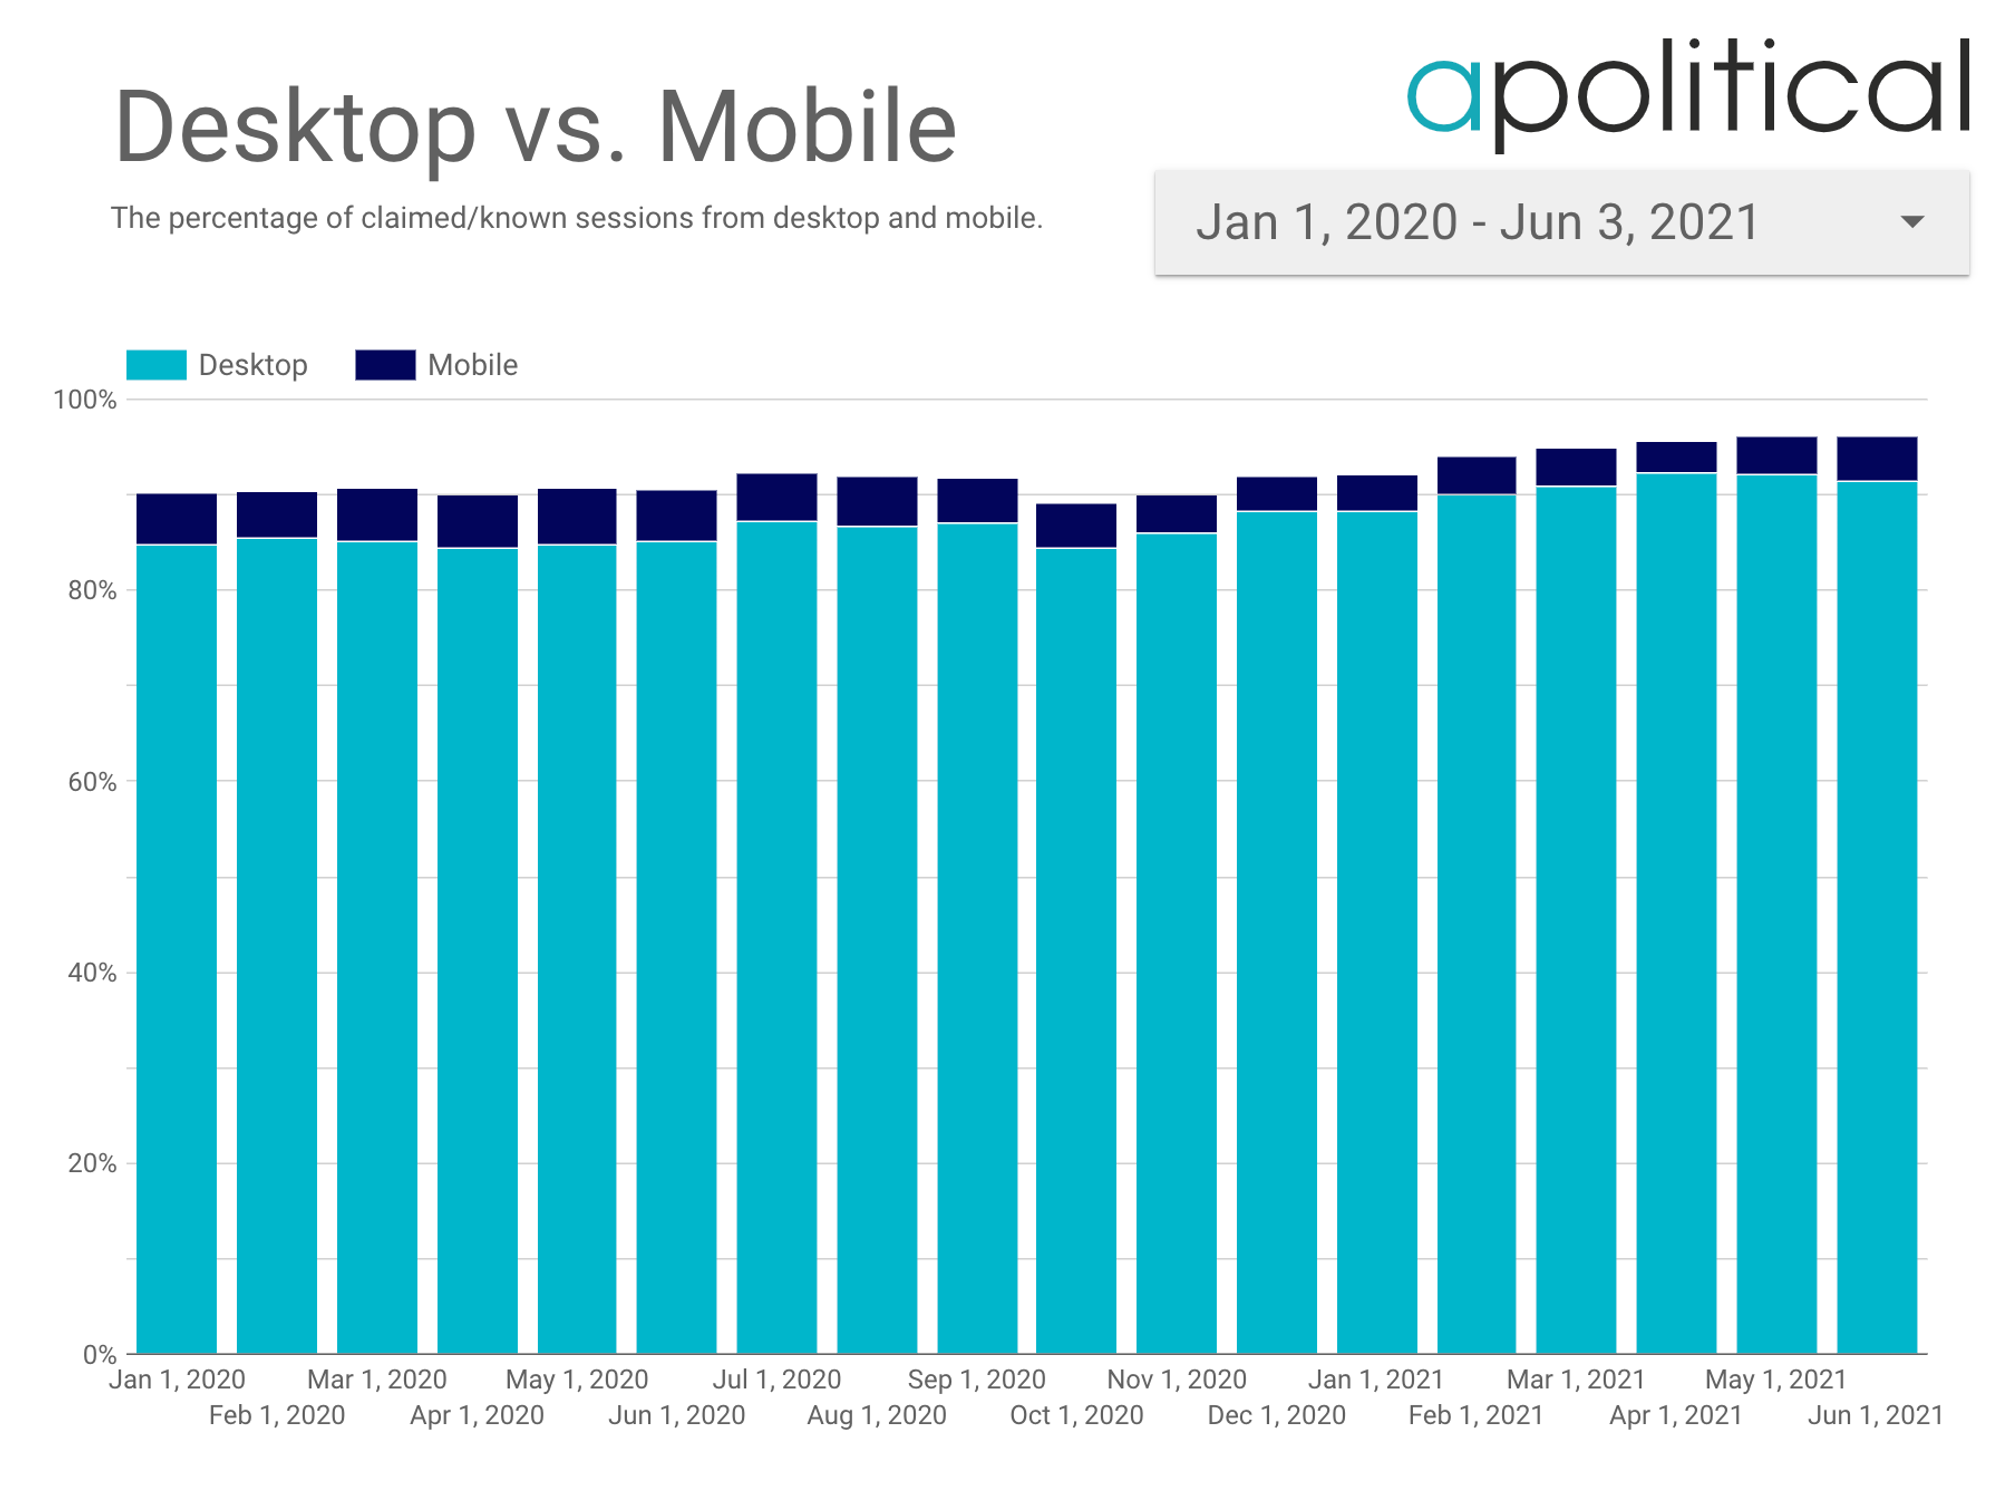 Figure 1: A bar graph showing the percentage of claimed/known sessions from desktop and mobile between Jan 1, 2020 and June 3, 2021. Less than 5% of visits per month appear to be from mobile devices.